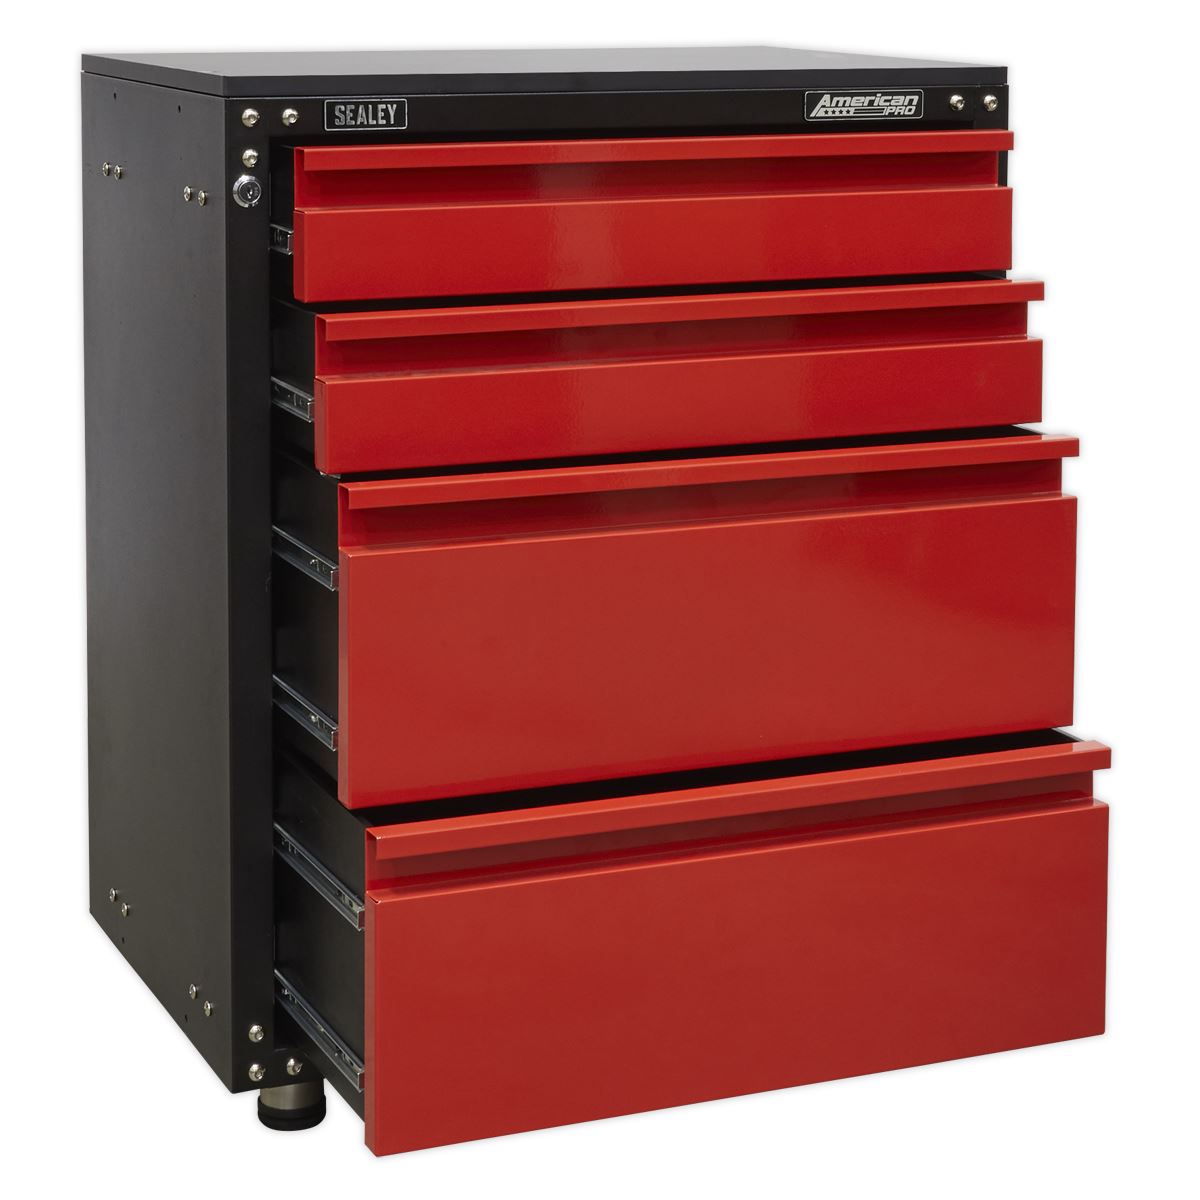 Sealey American Pro Modular 4 Drawer Cabinet with Worktop 665mm